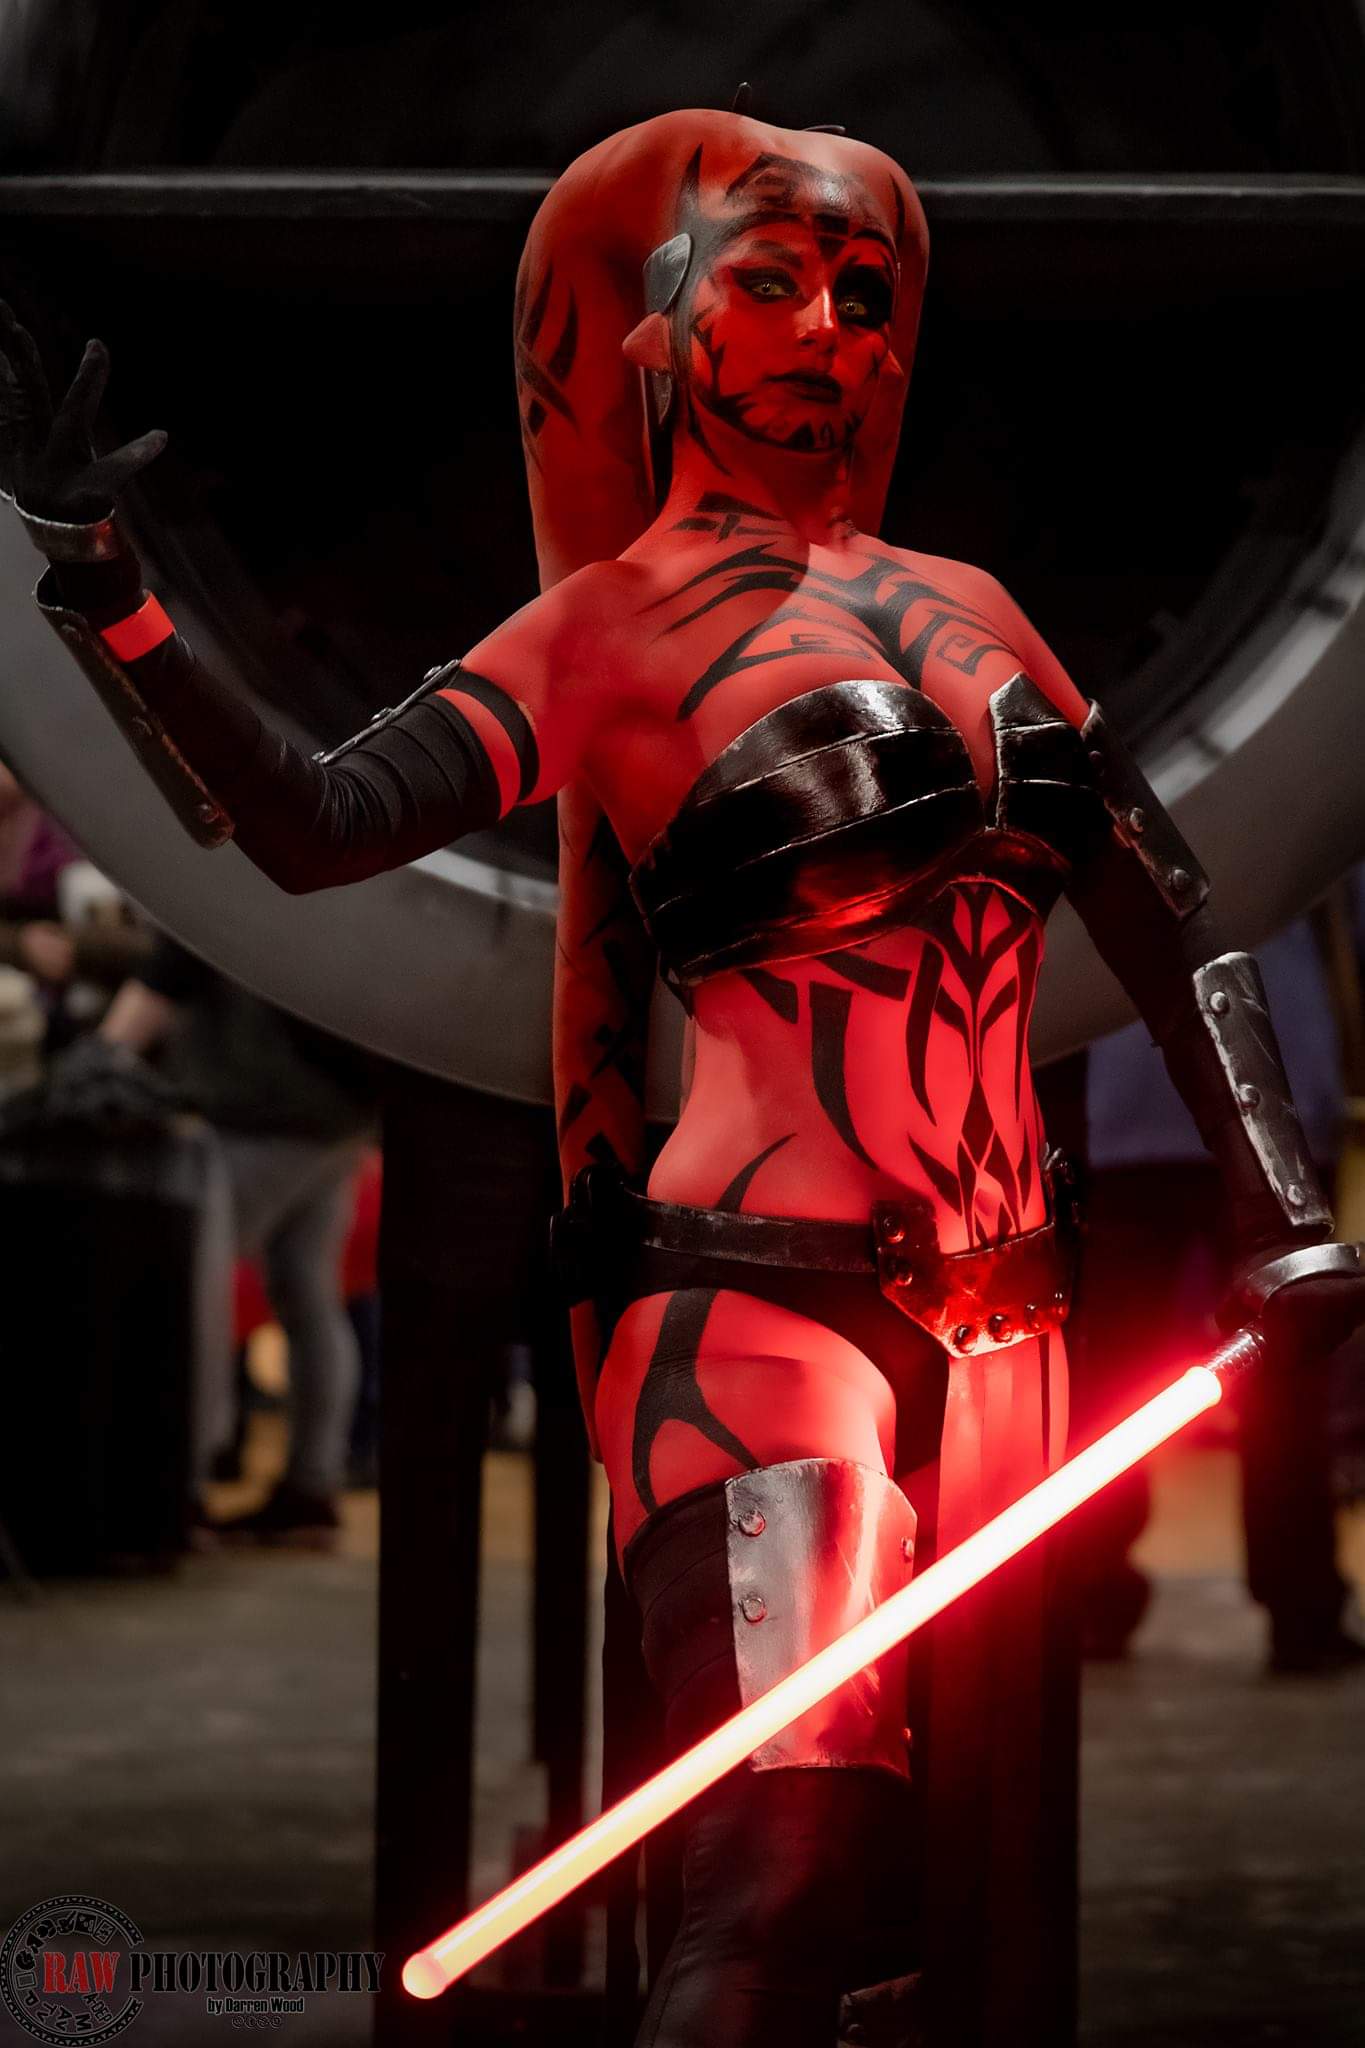 swtor darth talon outfit - Graw Photography by Darven Wood